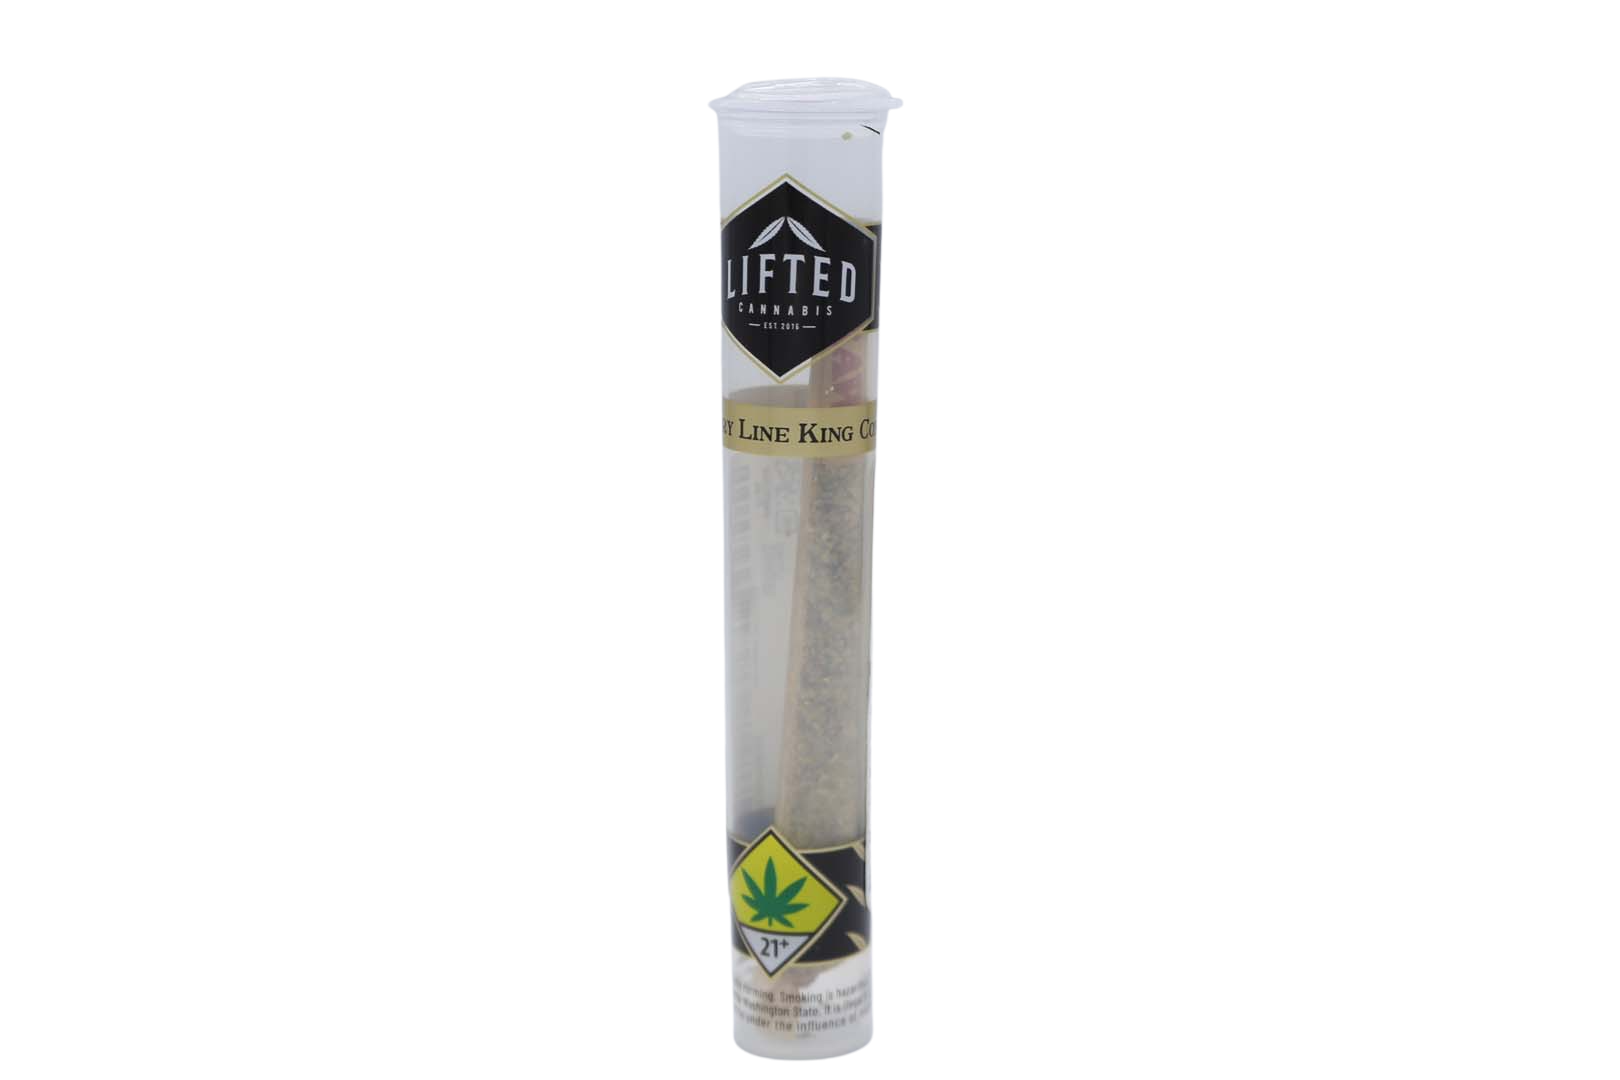 Lifted Pre-Roll Infused I-95 SugarStix